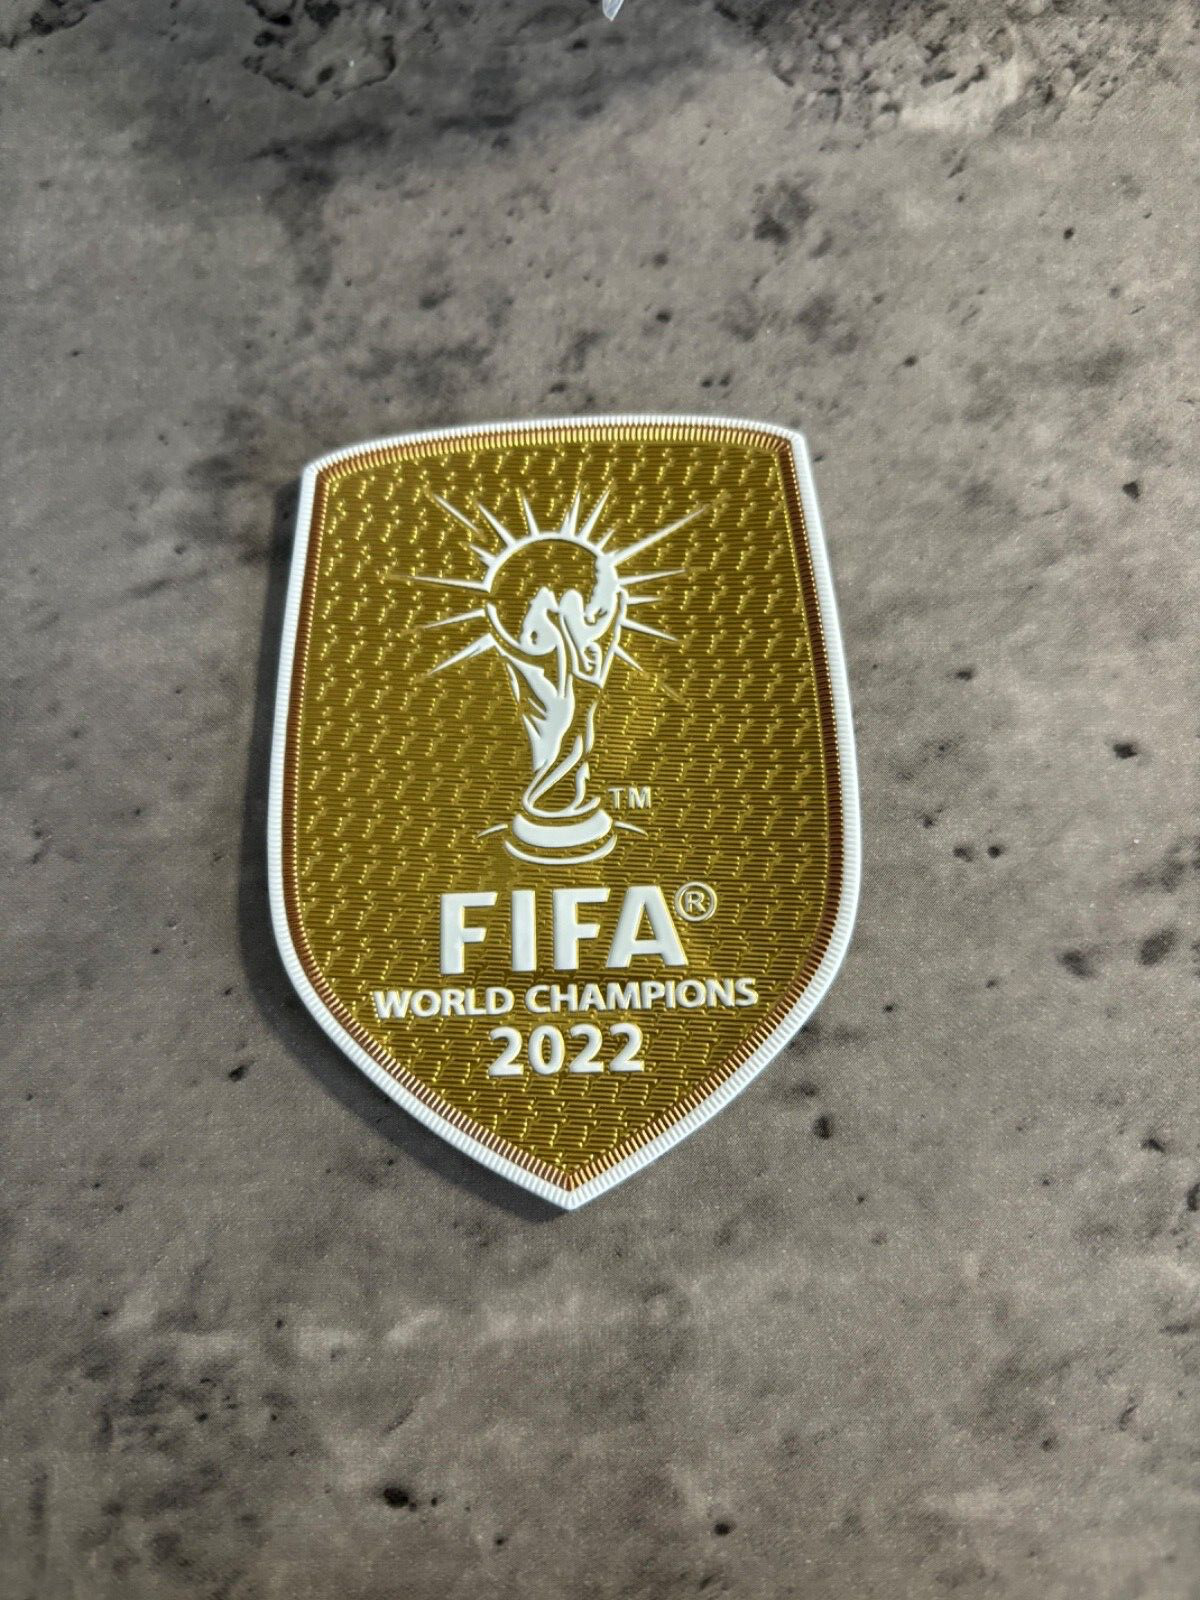 World Cup Champions 2022 Gold Badge Patch Argentina football shirt copa america